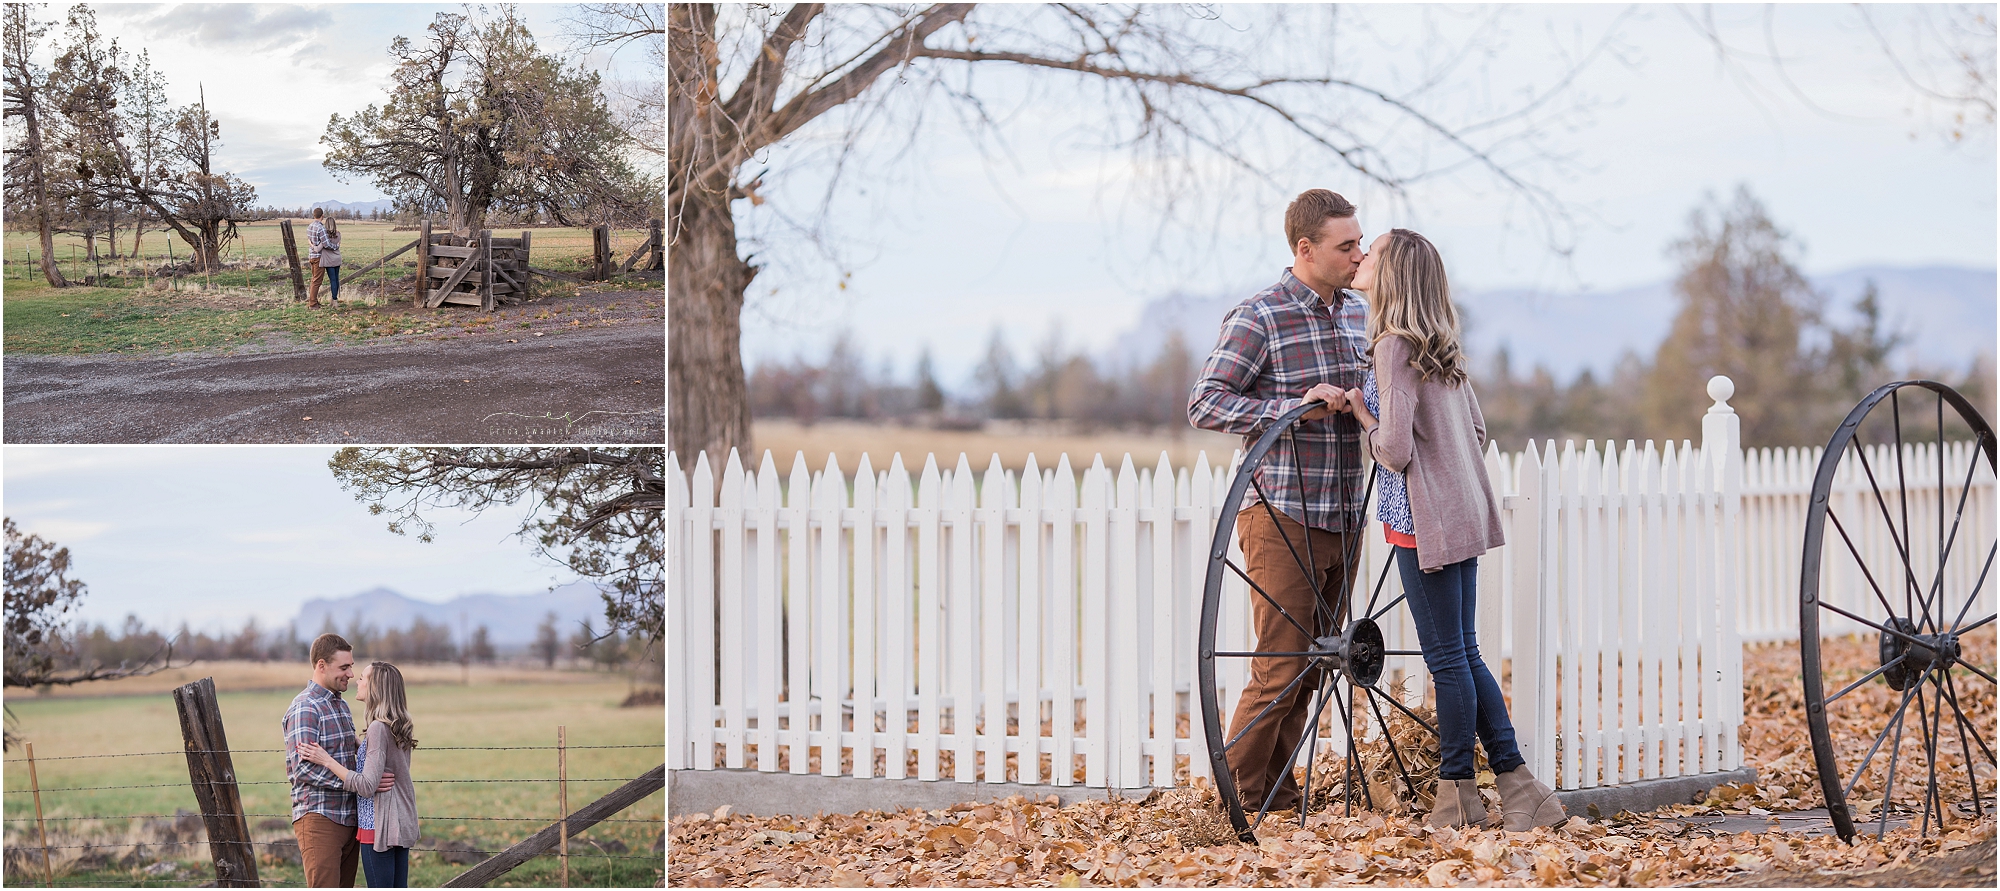 A gorgeous outdoor engagement photography session by Bend, Oregon photographer Erica Swantek Photography. 